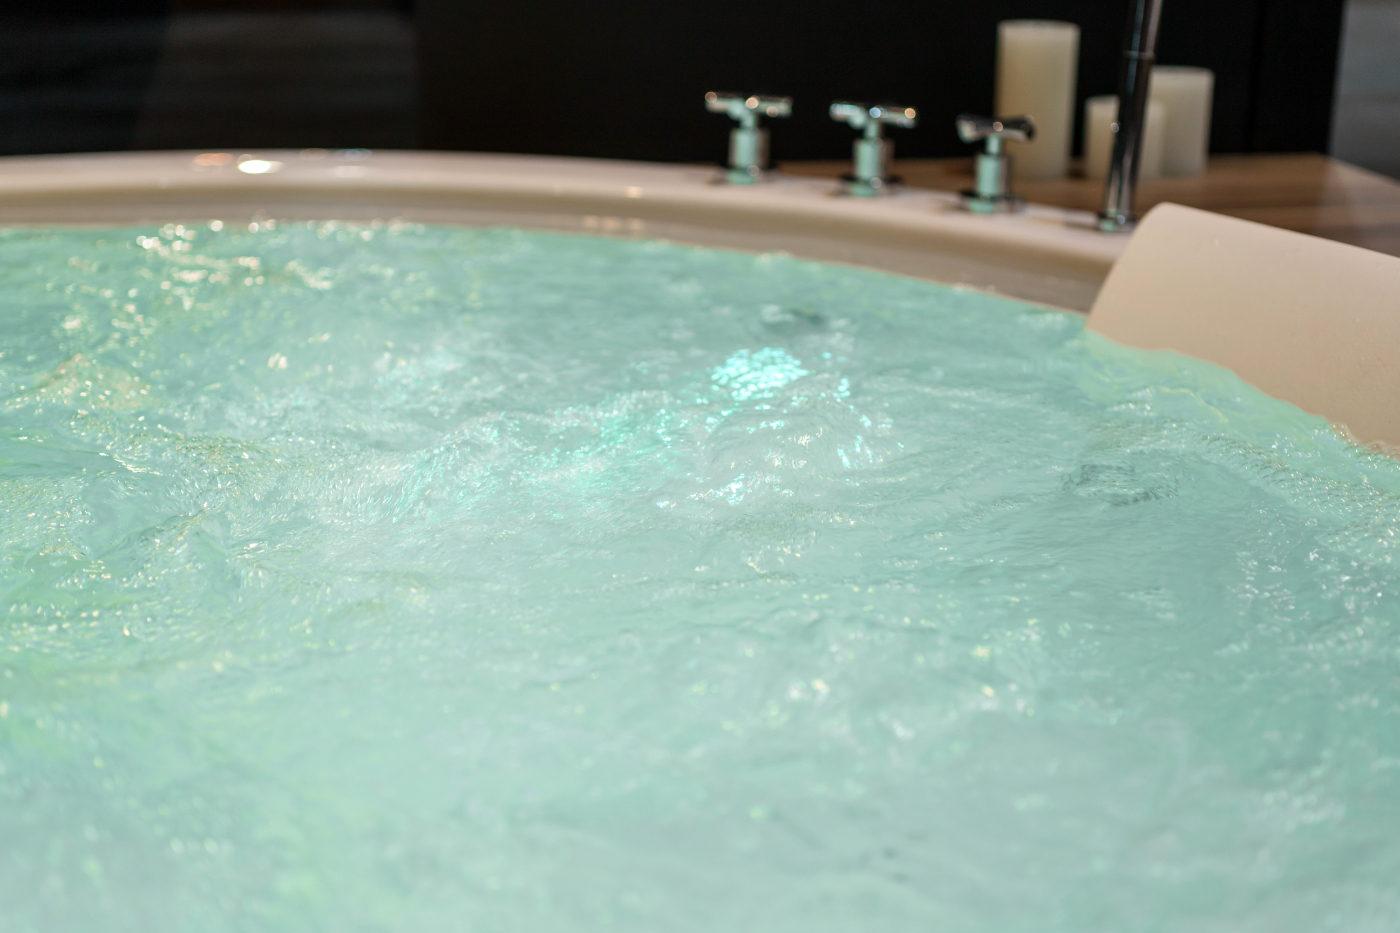 THE DAMAGE OF NOT MAINTAINING YOUR HOT TUB - Hot Tub Water